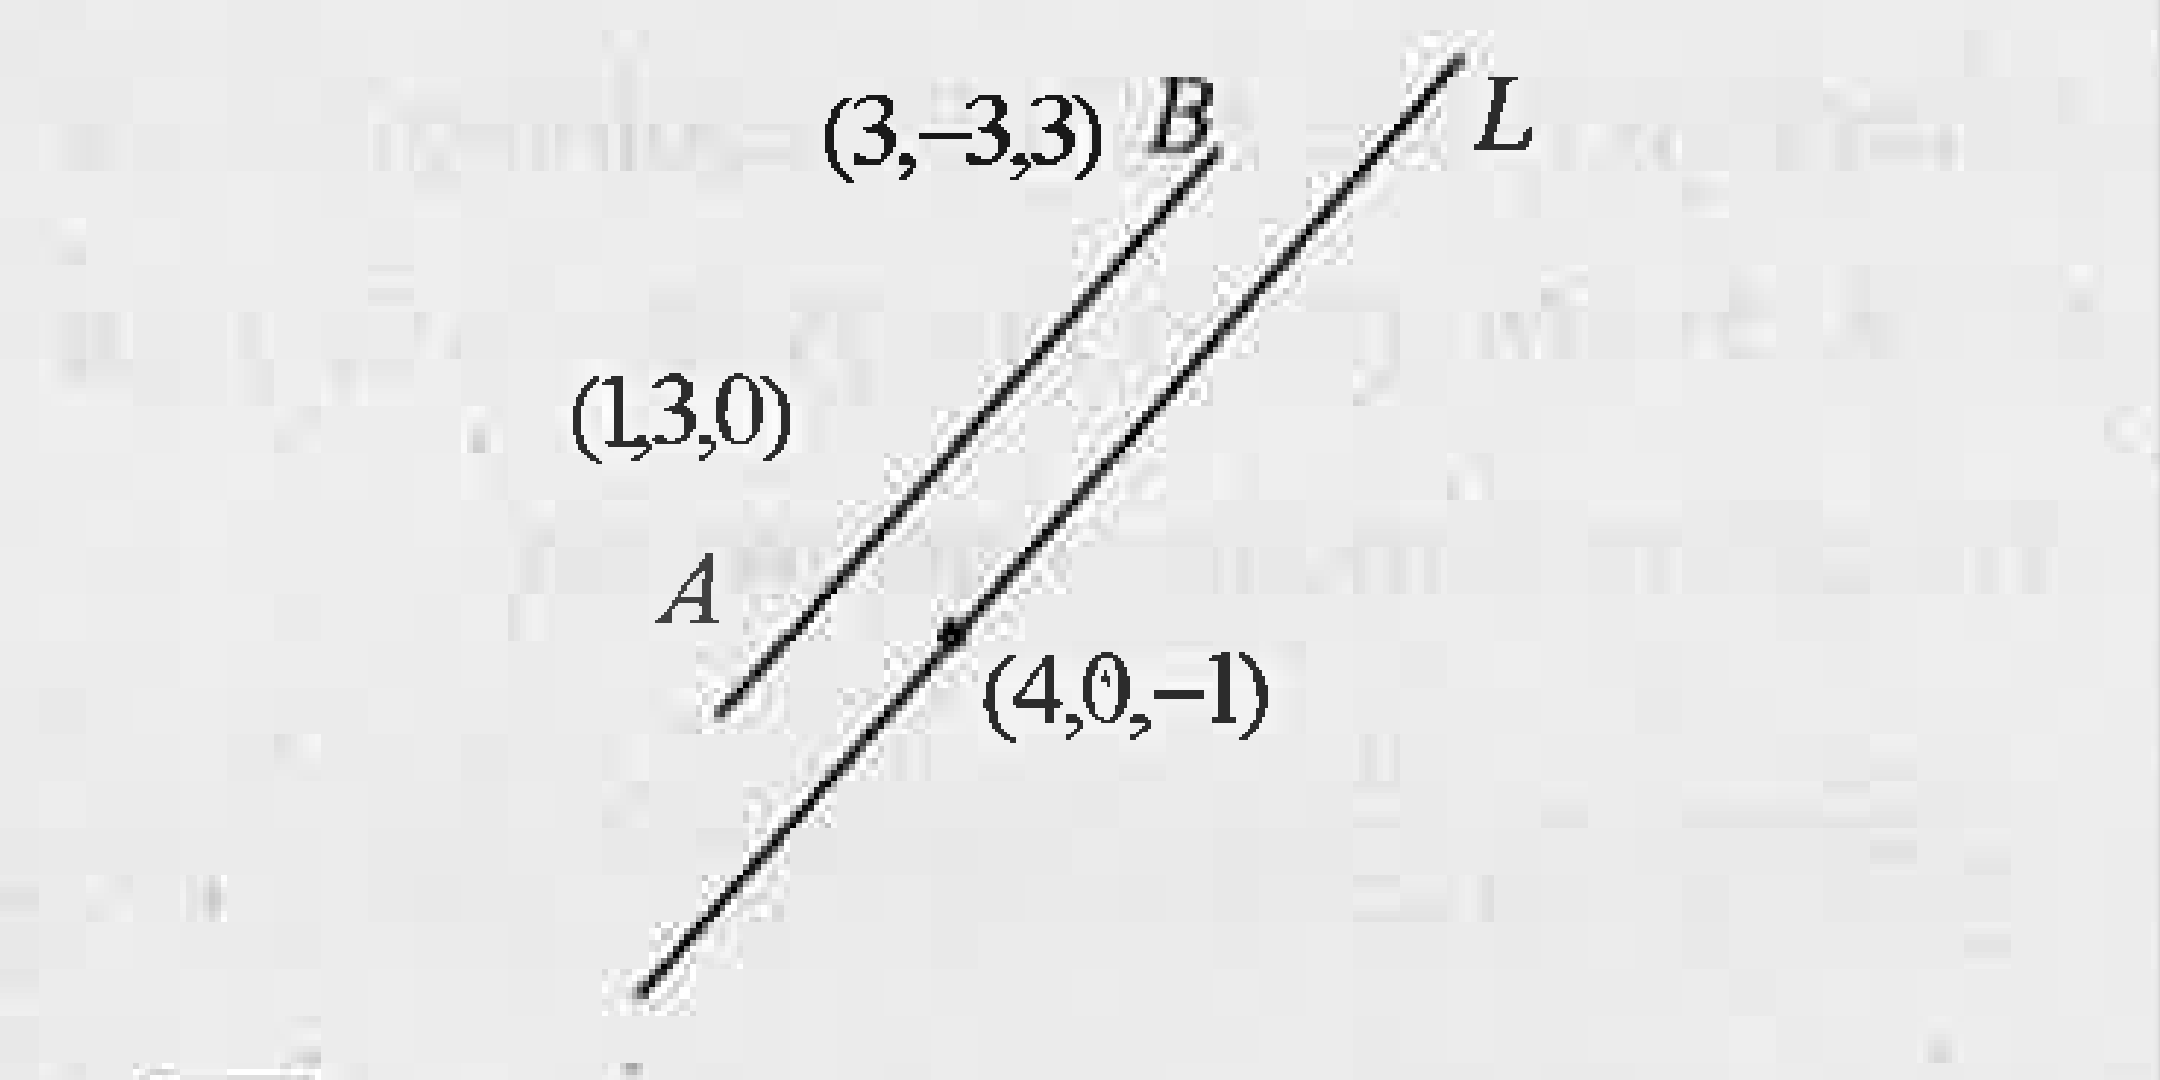 Consider two points A and B on L1 and a line L2 as shown in figure. Find the foot of the perpendicular drawn from (2,3,4) on L1 to the line L2.